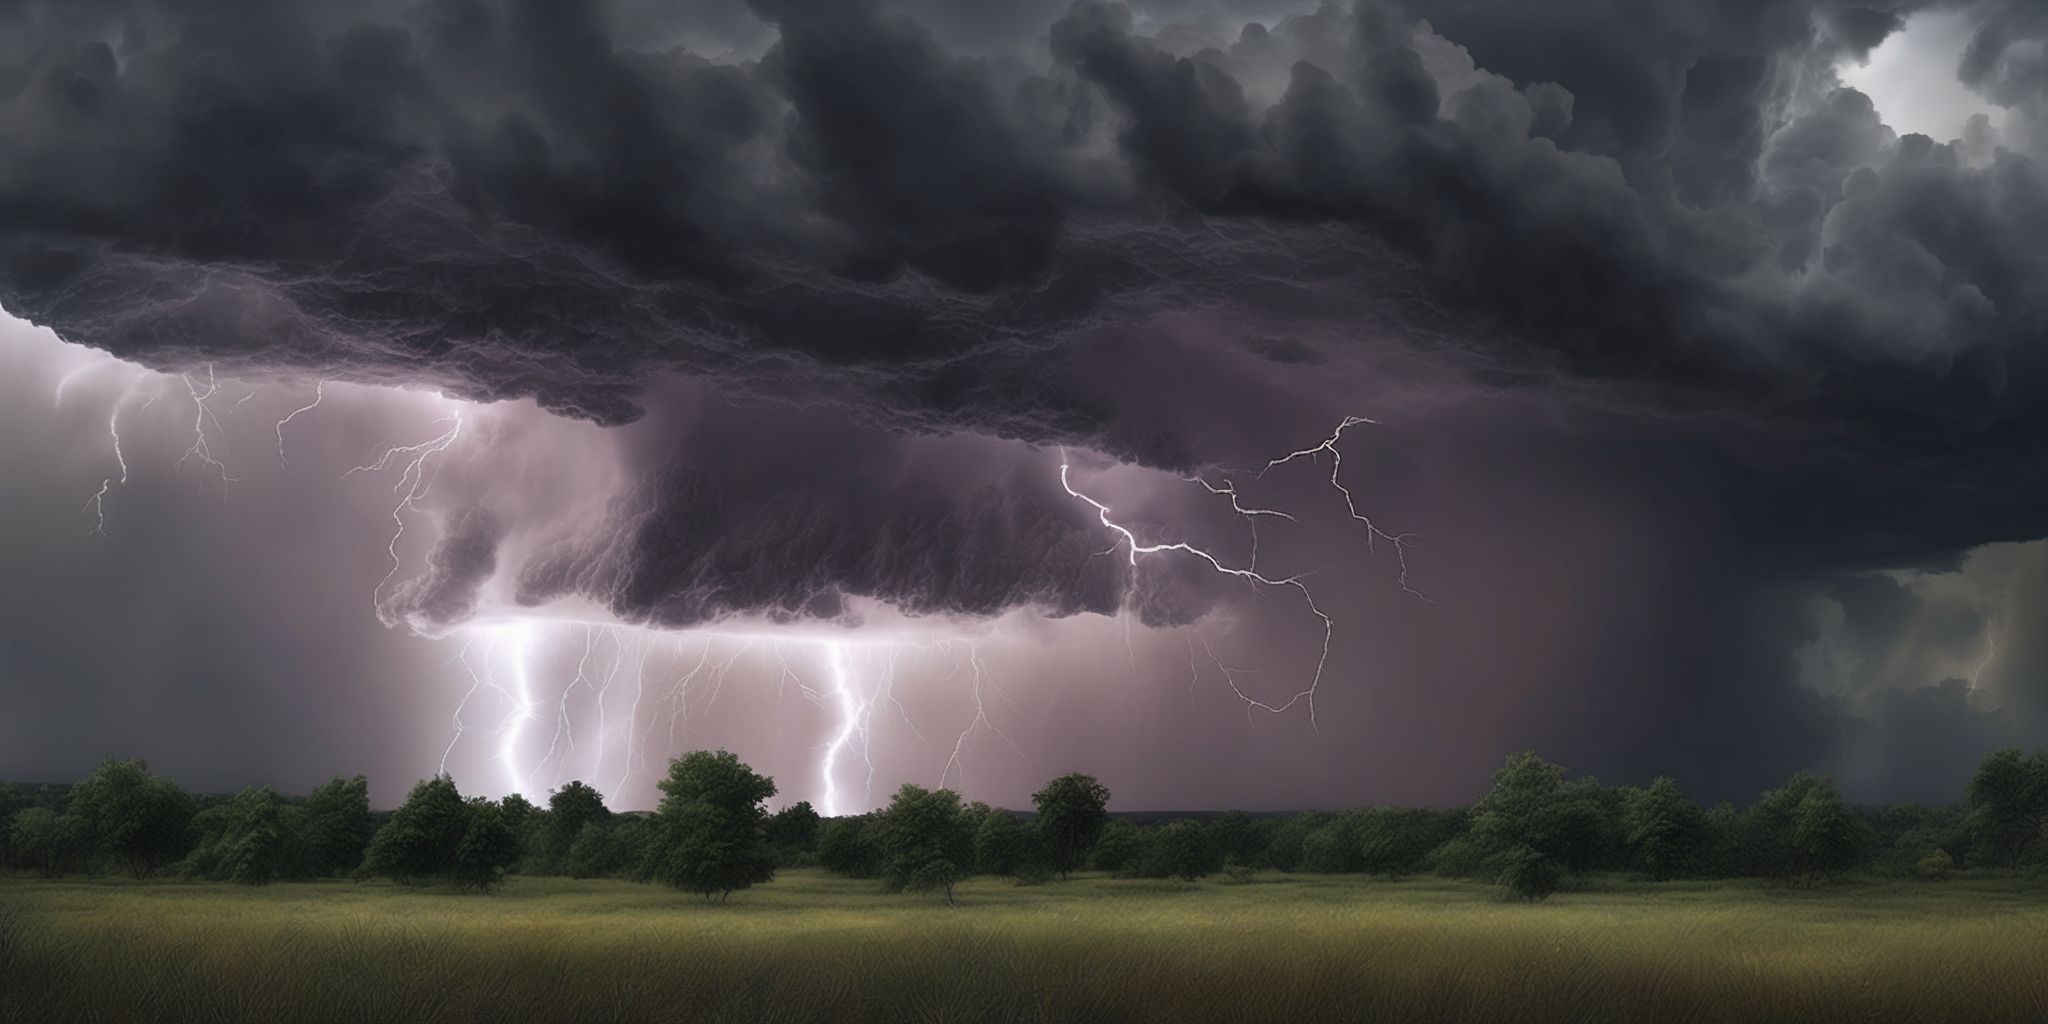 Thunderstorm  in realistic, photographic style